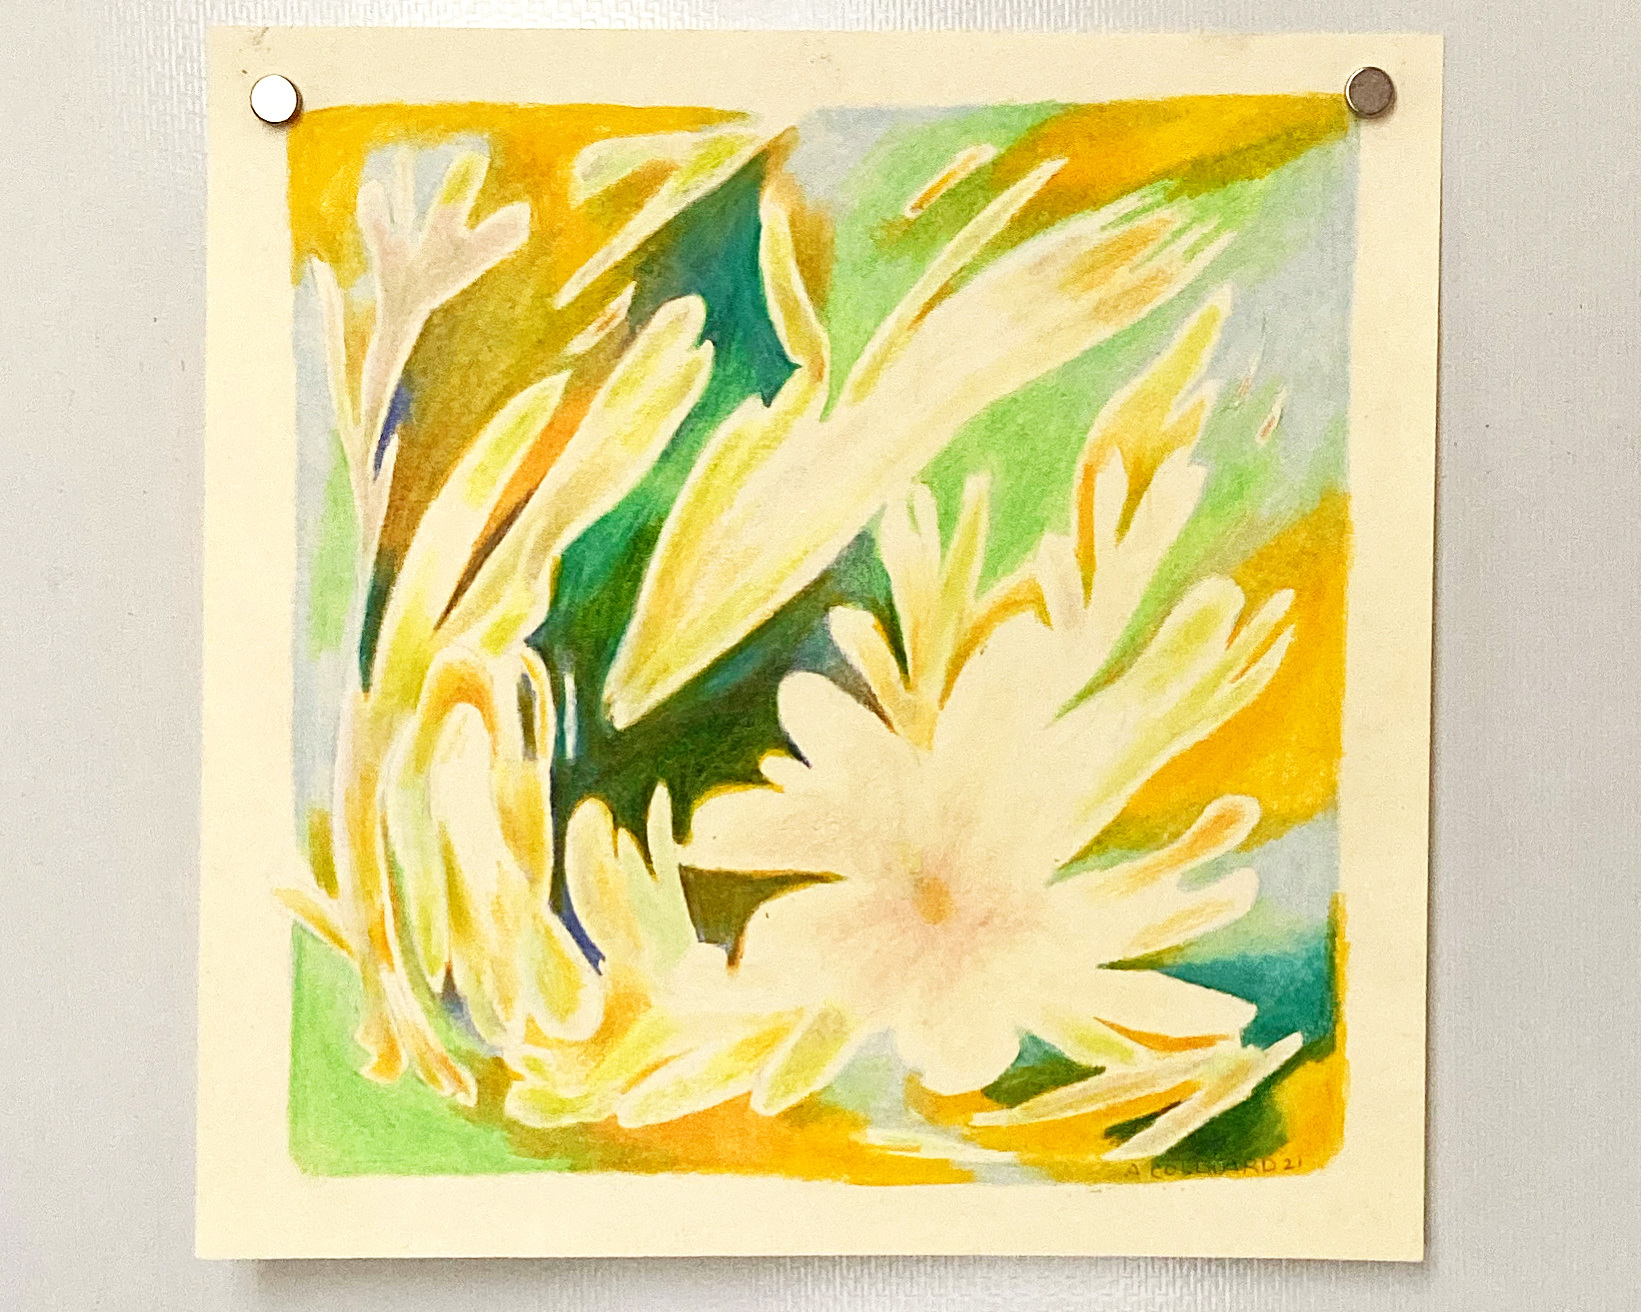 Abstract drawing of flowers in greens and yellows